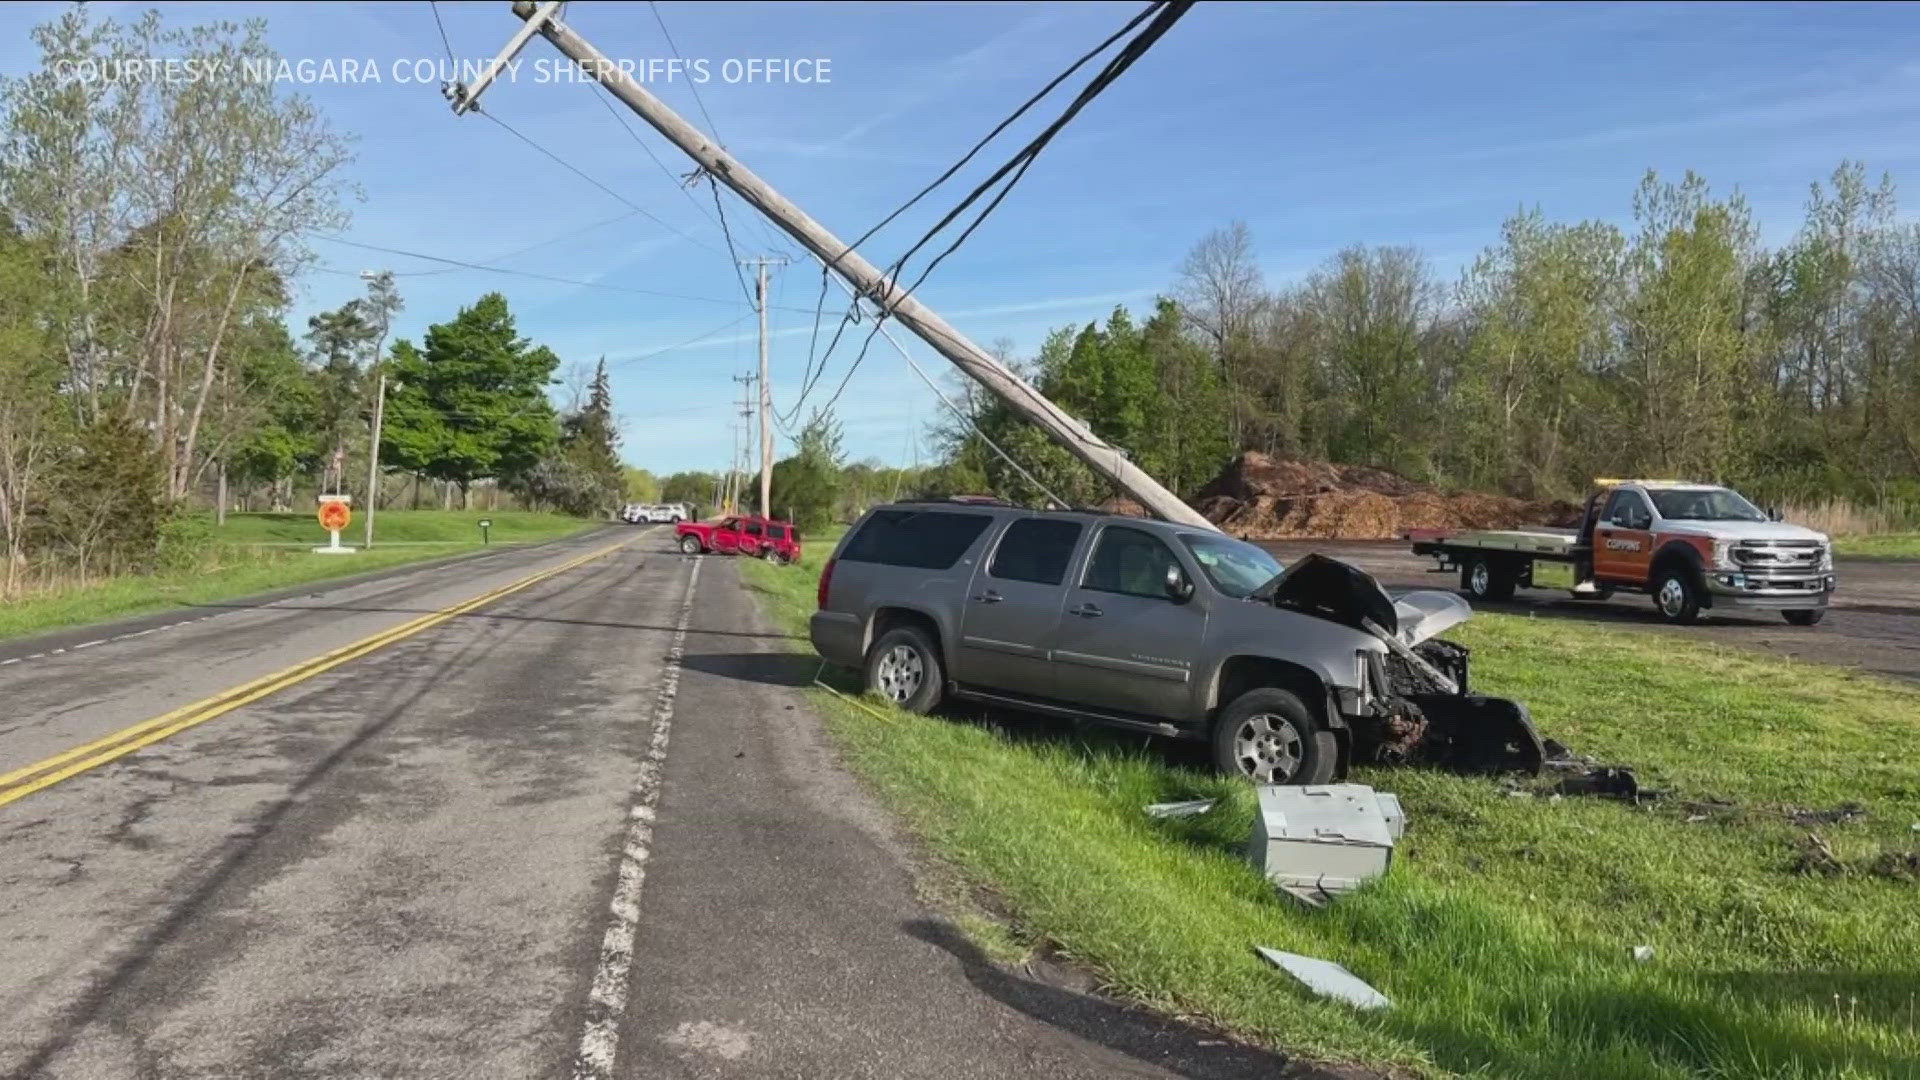 Woman drives into utility pole in Niagara County by Bond Lake Park